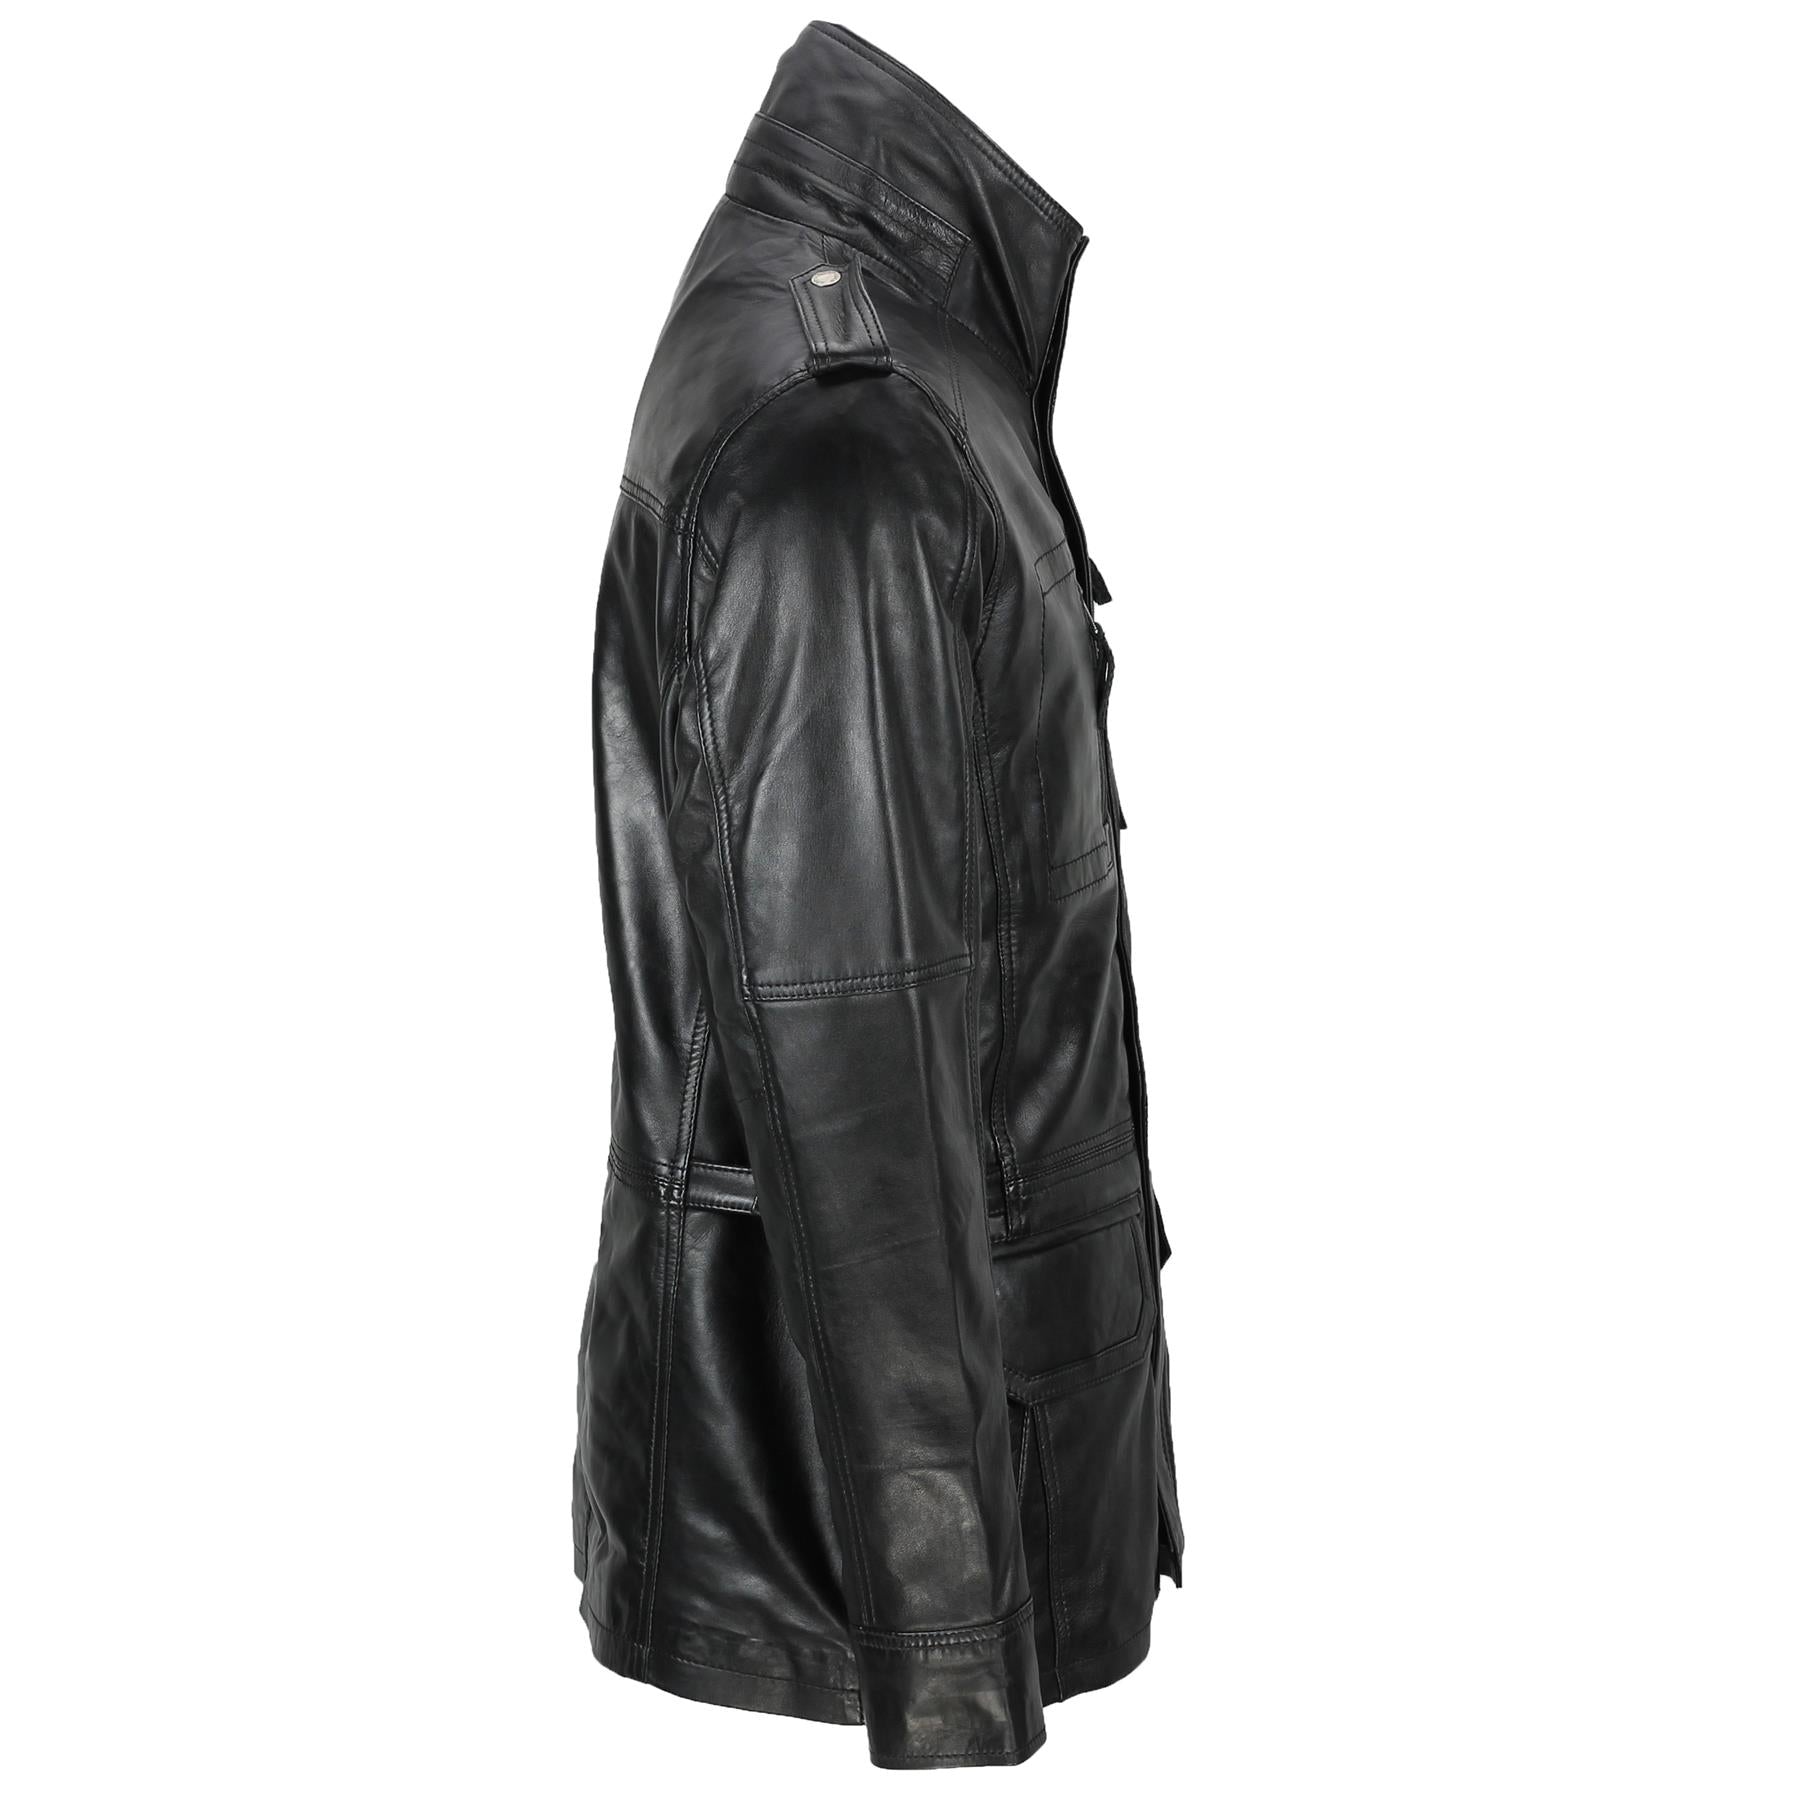 Mens Classic Black Soft Wax Real Leather Smart Vintage Jacket Military Coat